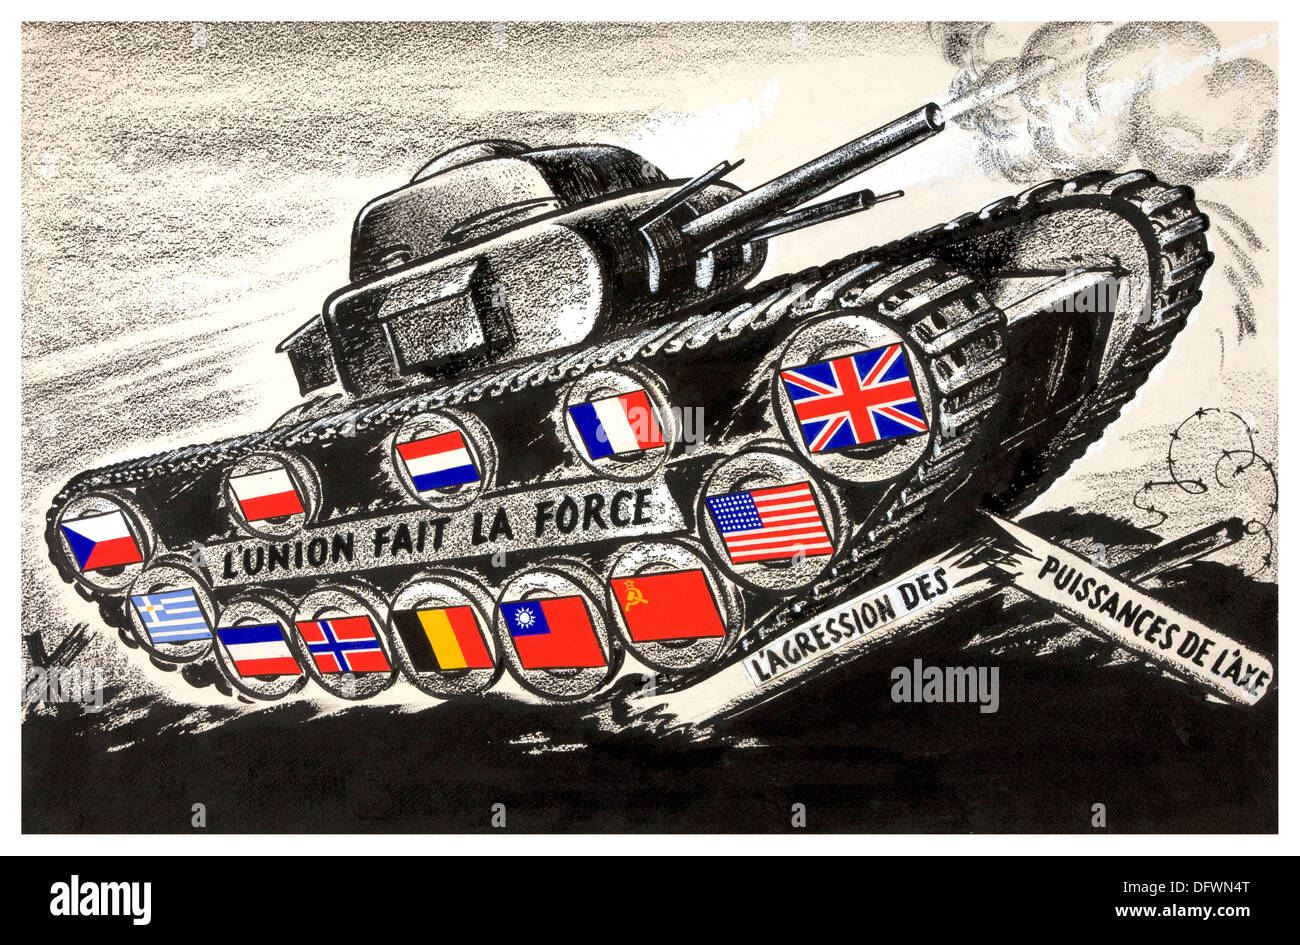 WW2 propaganda poster showing unity between axis forces with flags on a tank in battle Stock Photo